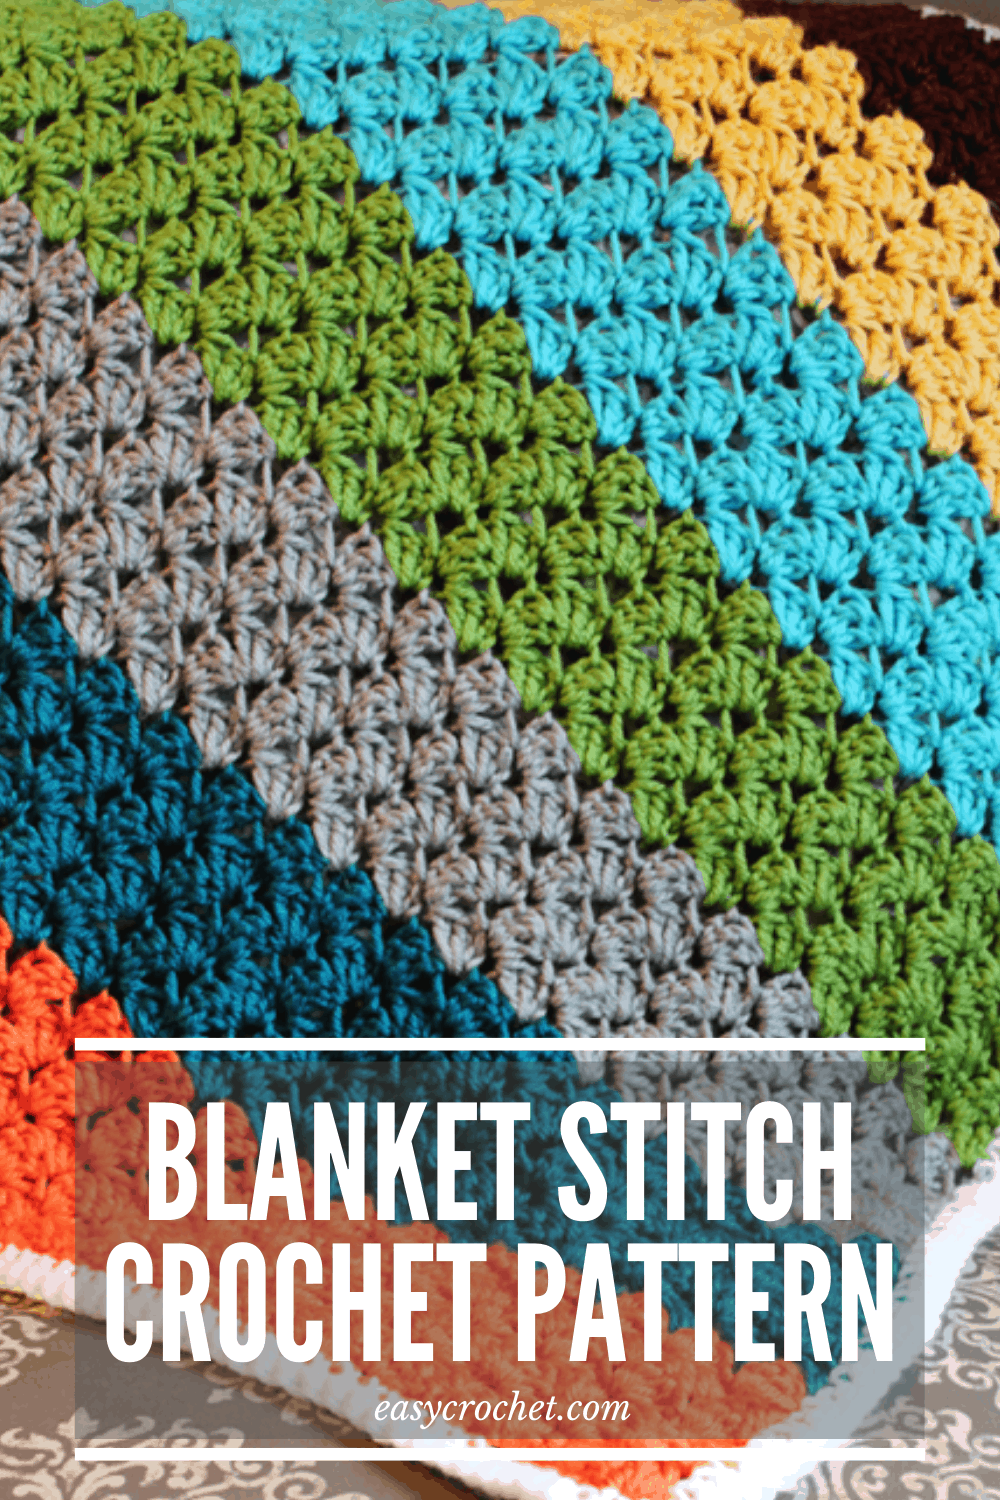 Learn how to crochet the easy blanket stitch with this free crochet stitch tutorial that is perfect for blankets, and many other crochet projects! via @easycrochetcom